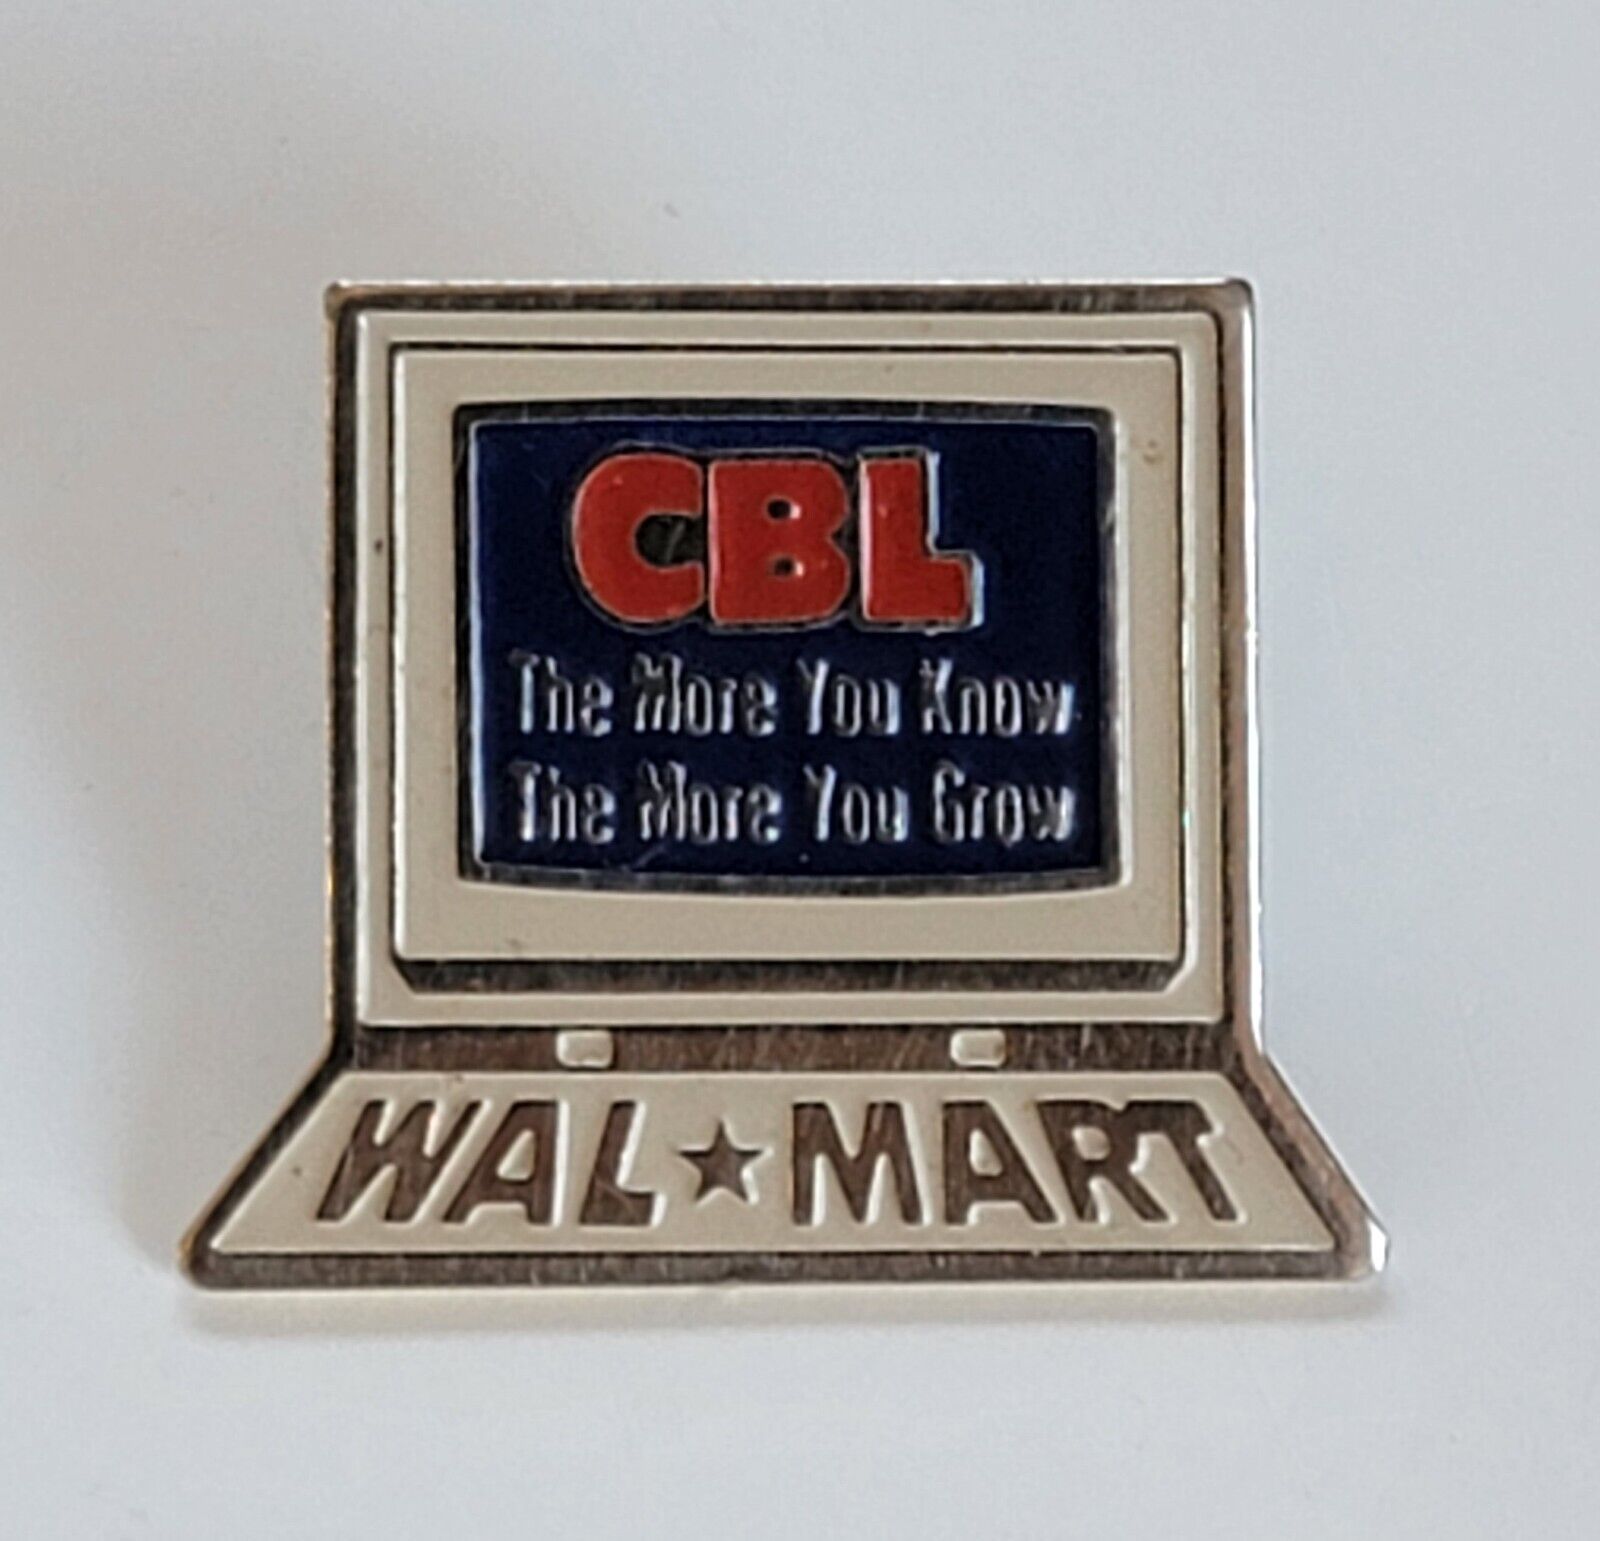 CBL Hogeye Walmart The More You Know The More You Grow Enameled Lapel Hat Pin.